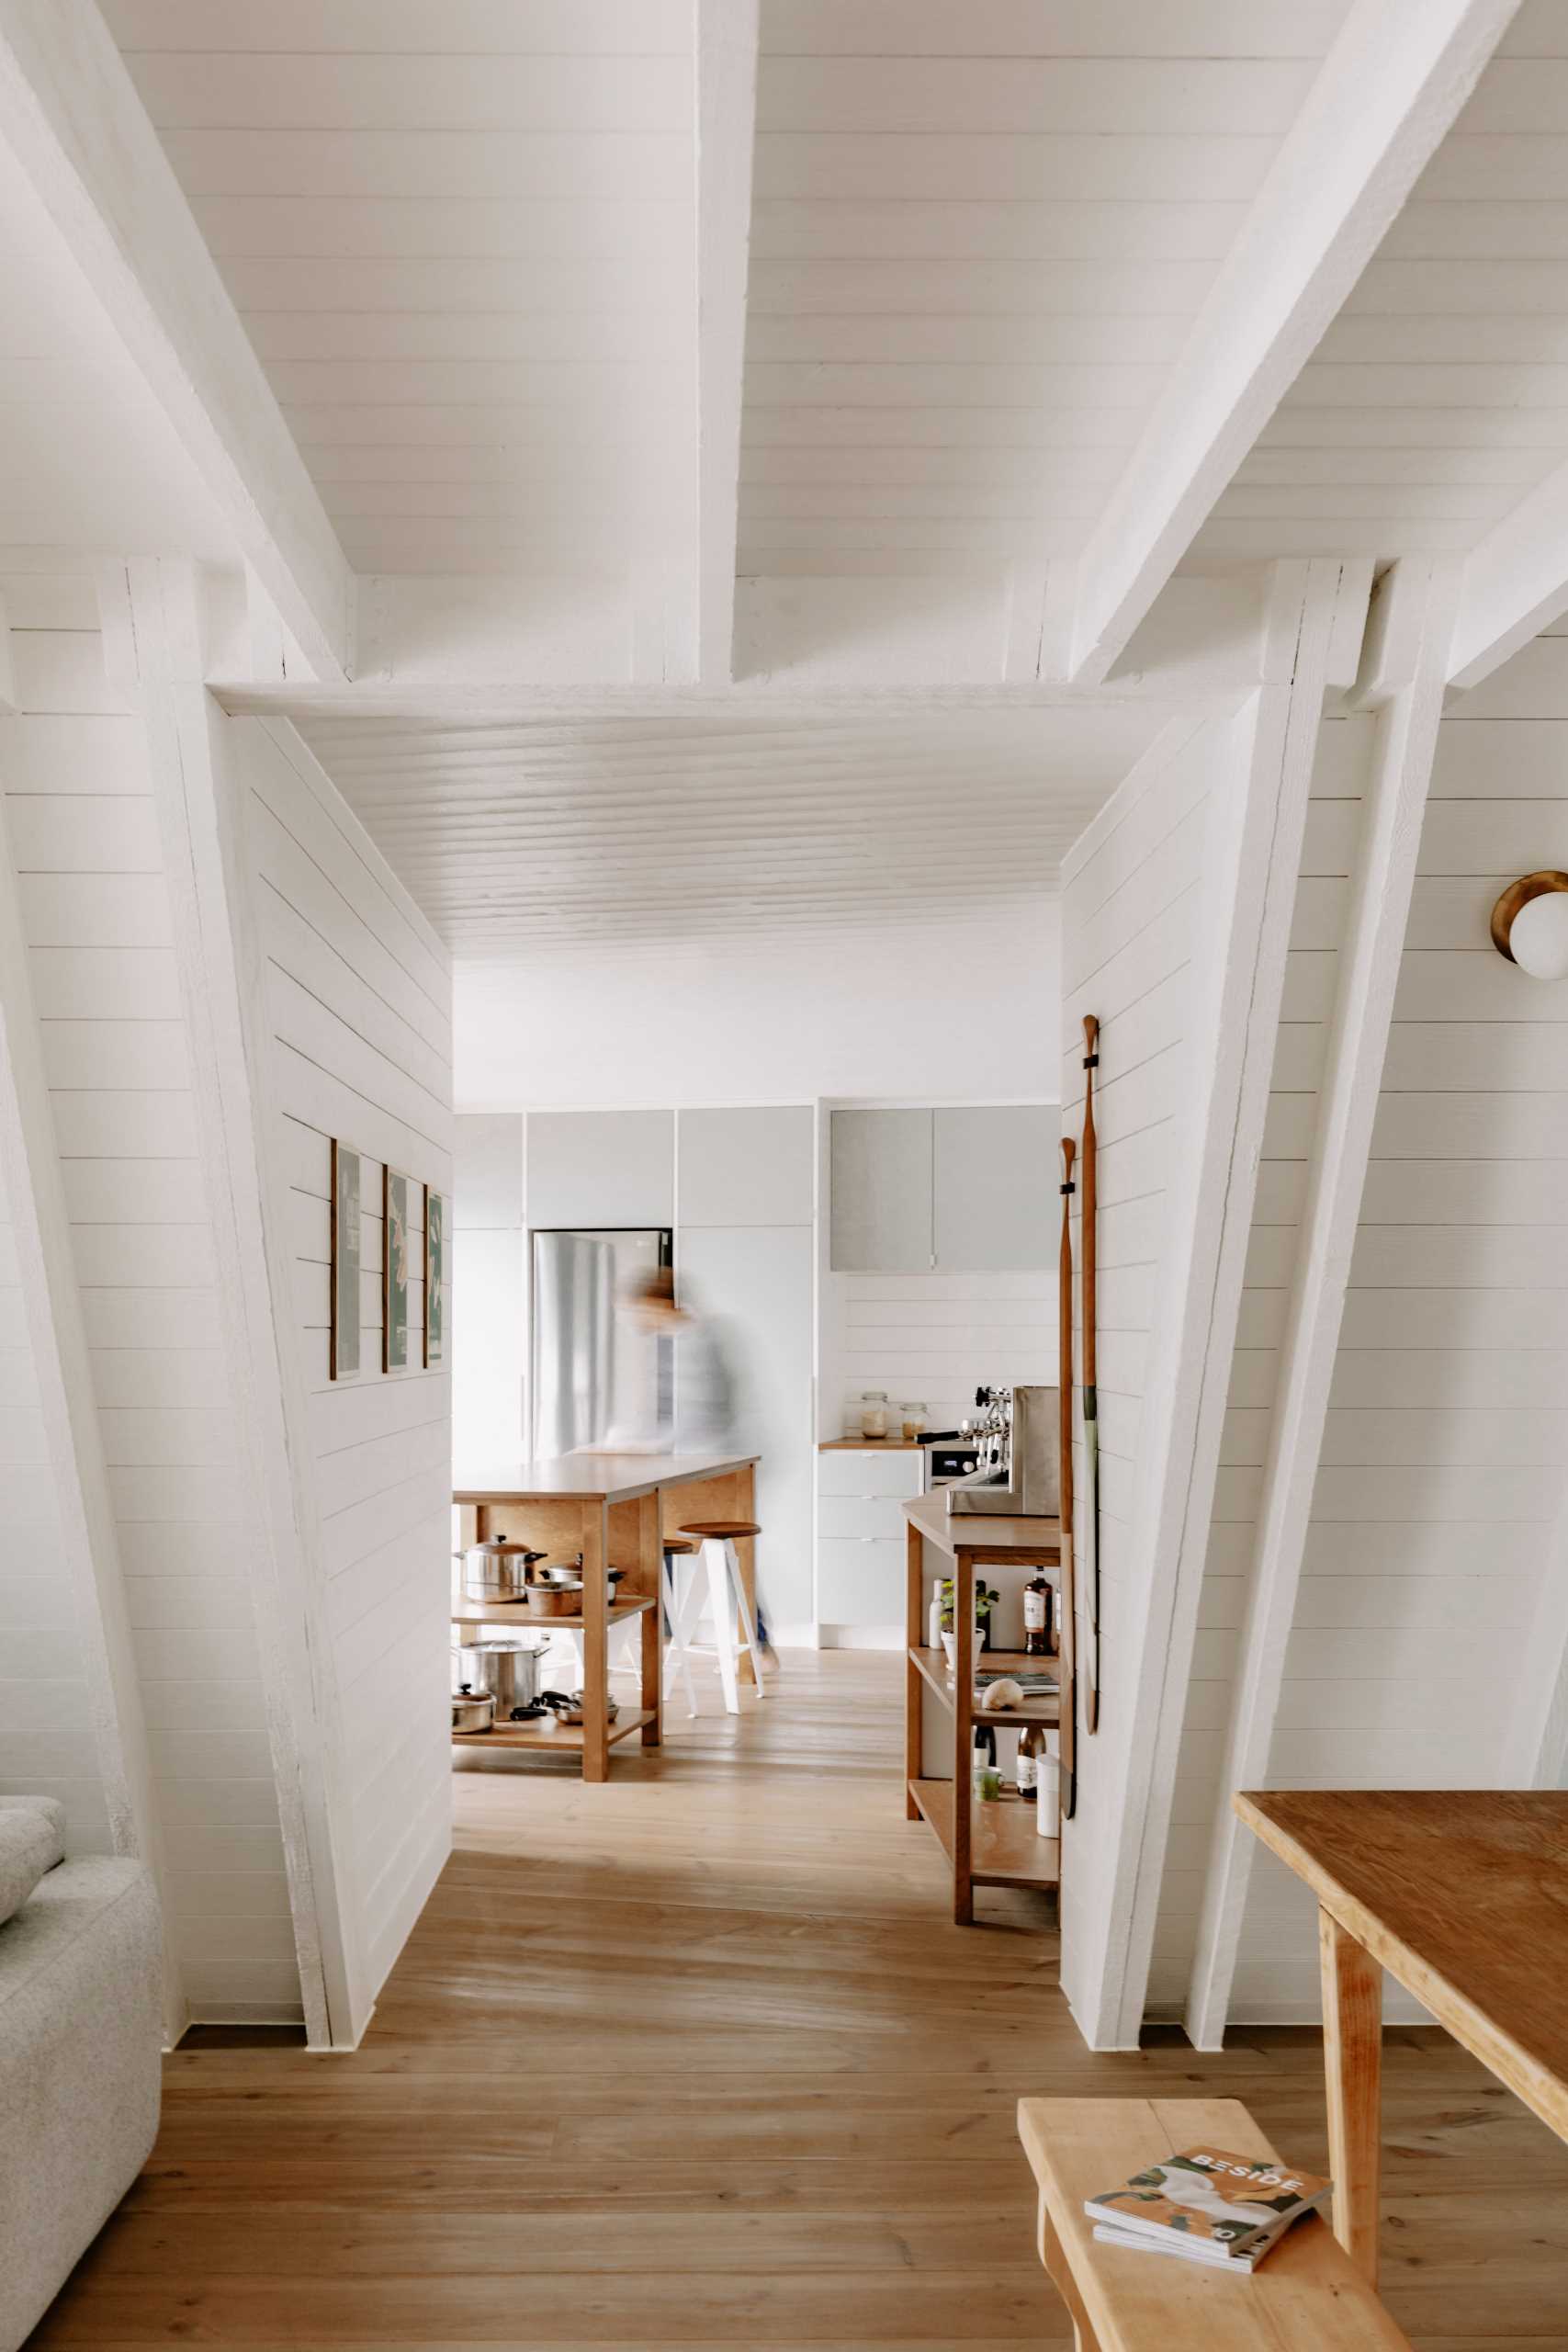 Modern kitchen inside an updated A-Frame cabin with a white interior and wood floors.